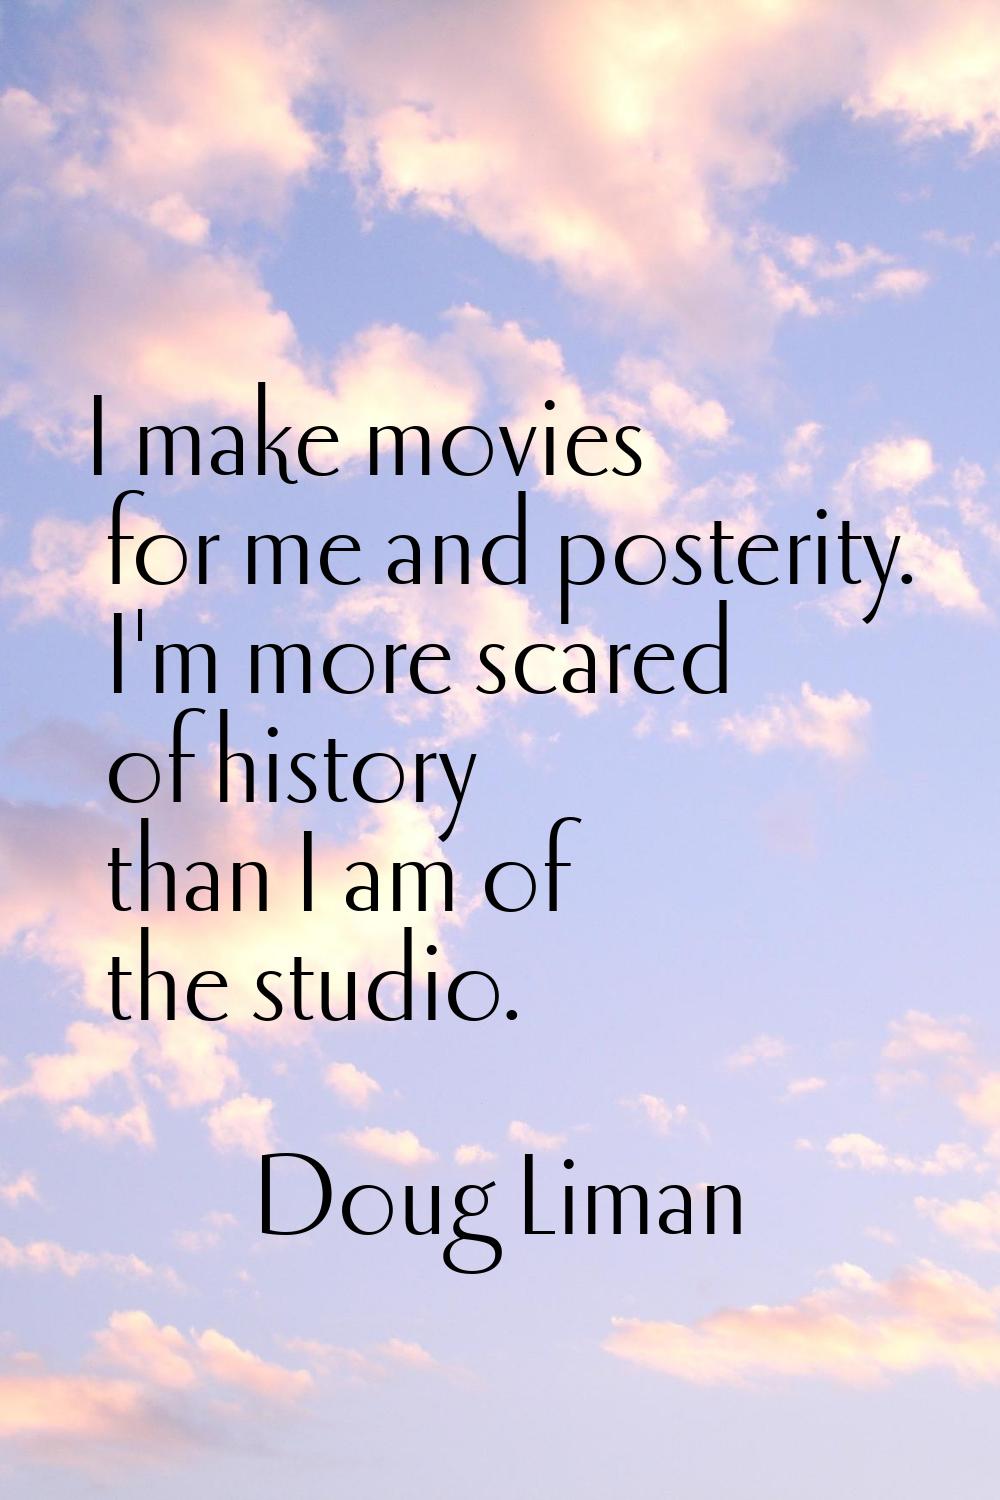 I make movies for me and posterity. I'm more scared of history than I am of the studio.